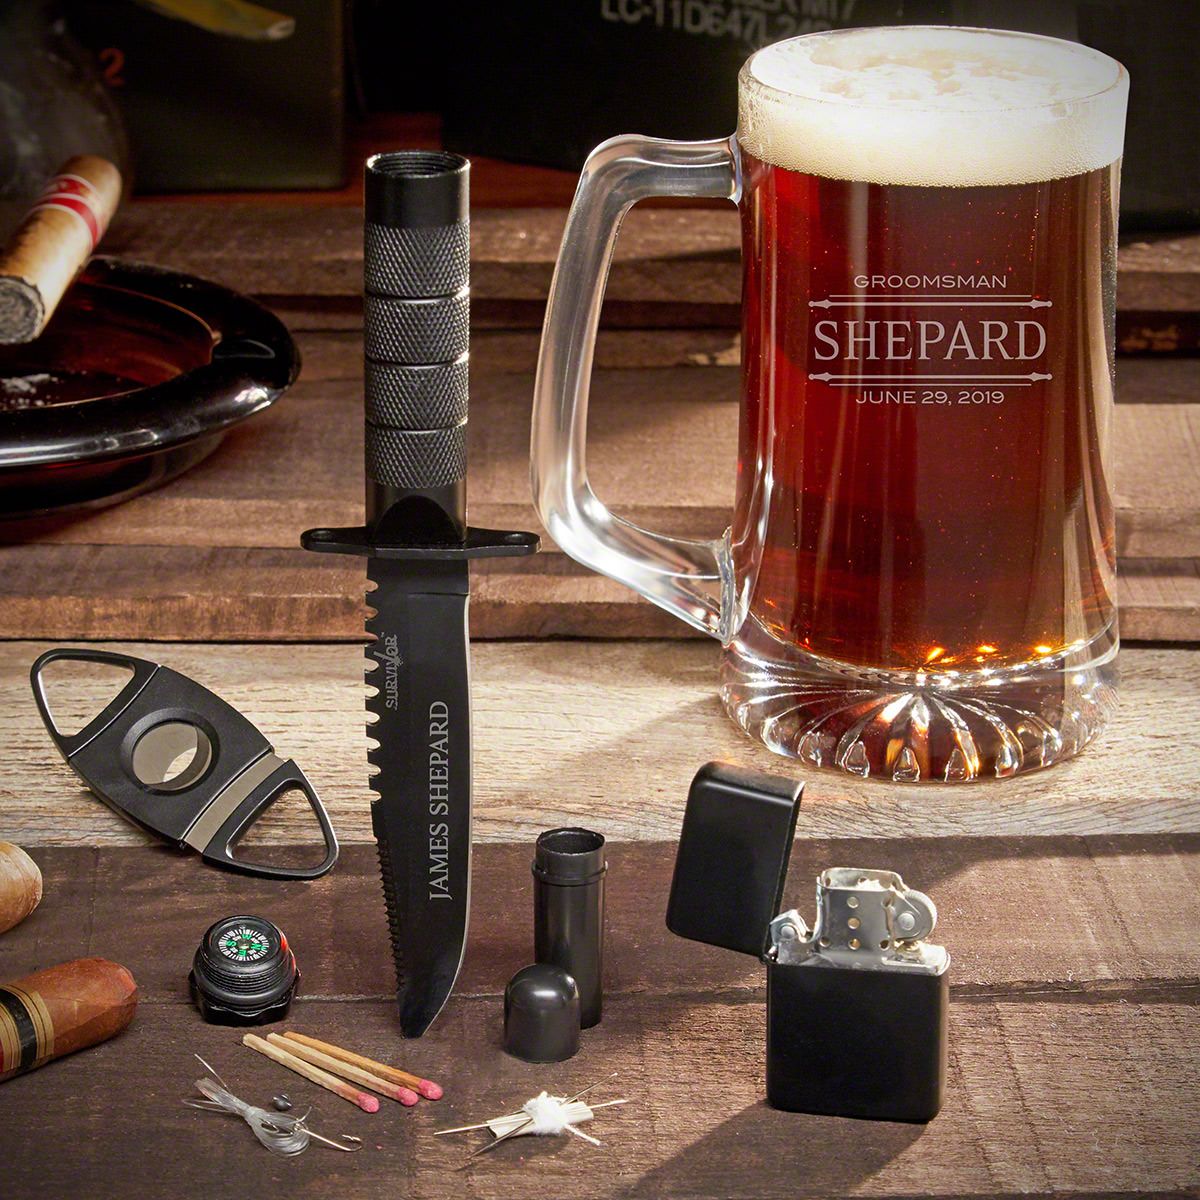 https://images.homewetbar.com/media/catalog/product/7/8/7889-stanford-beer-gift-set-with-tactical-knife_1.jpg?store=default&image-type=image